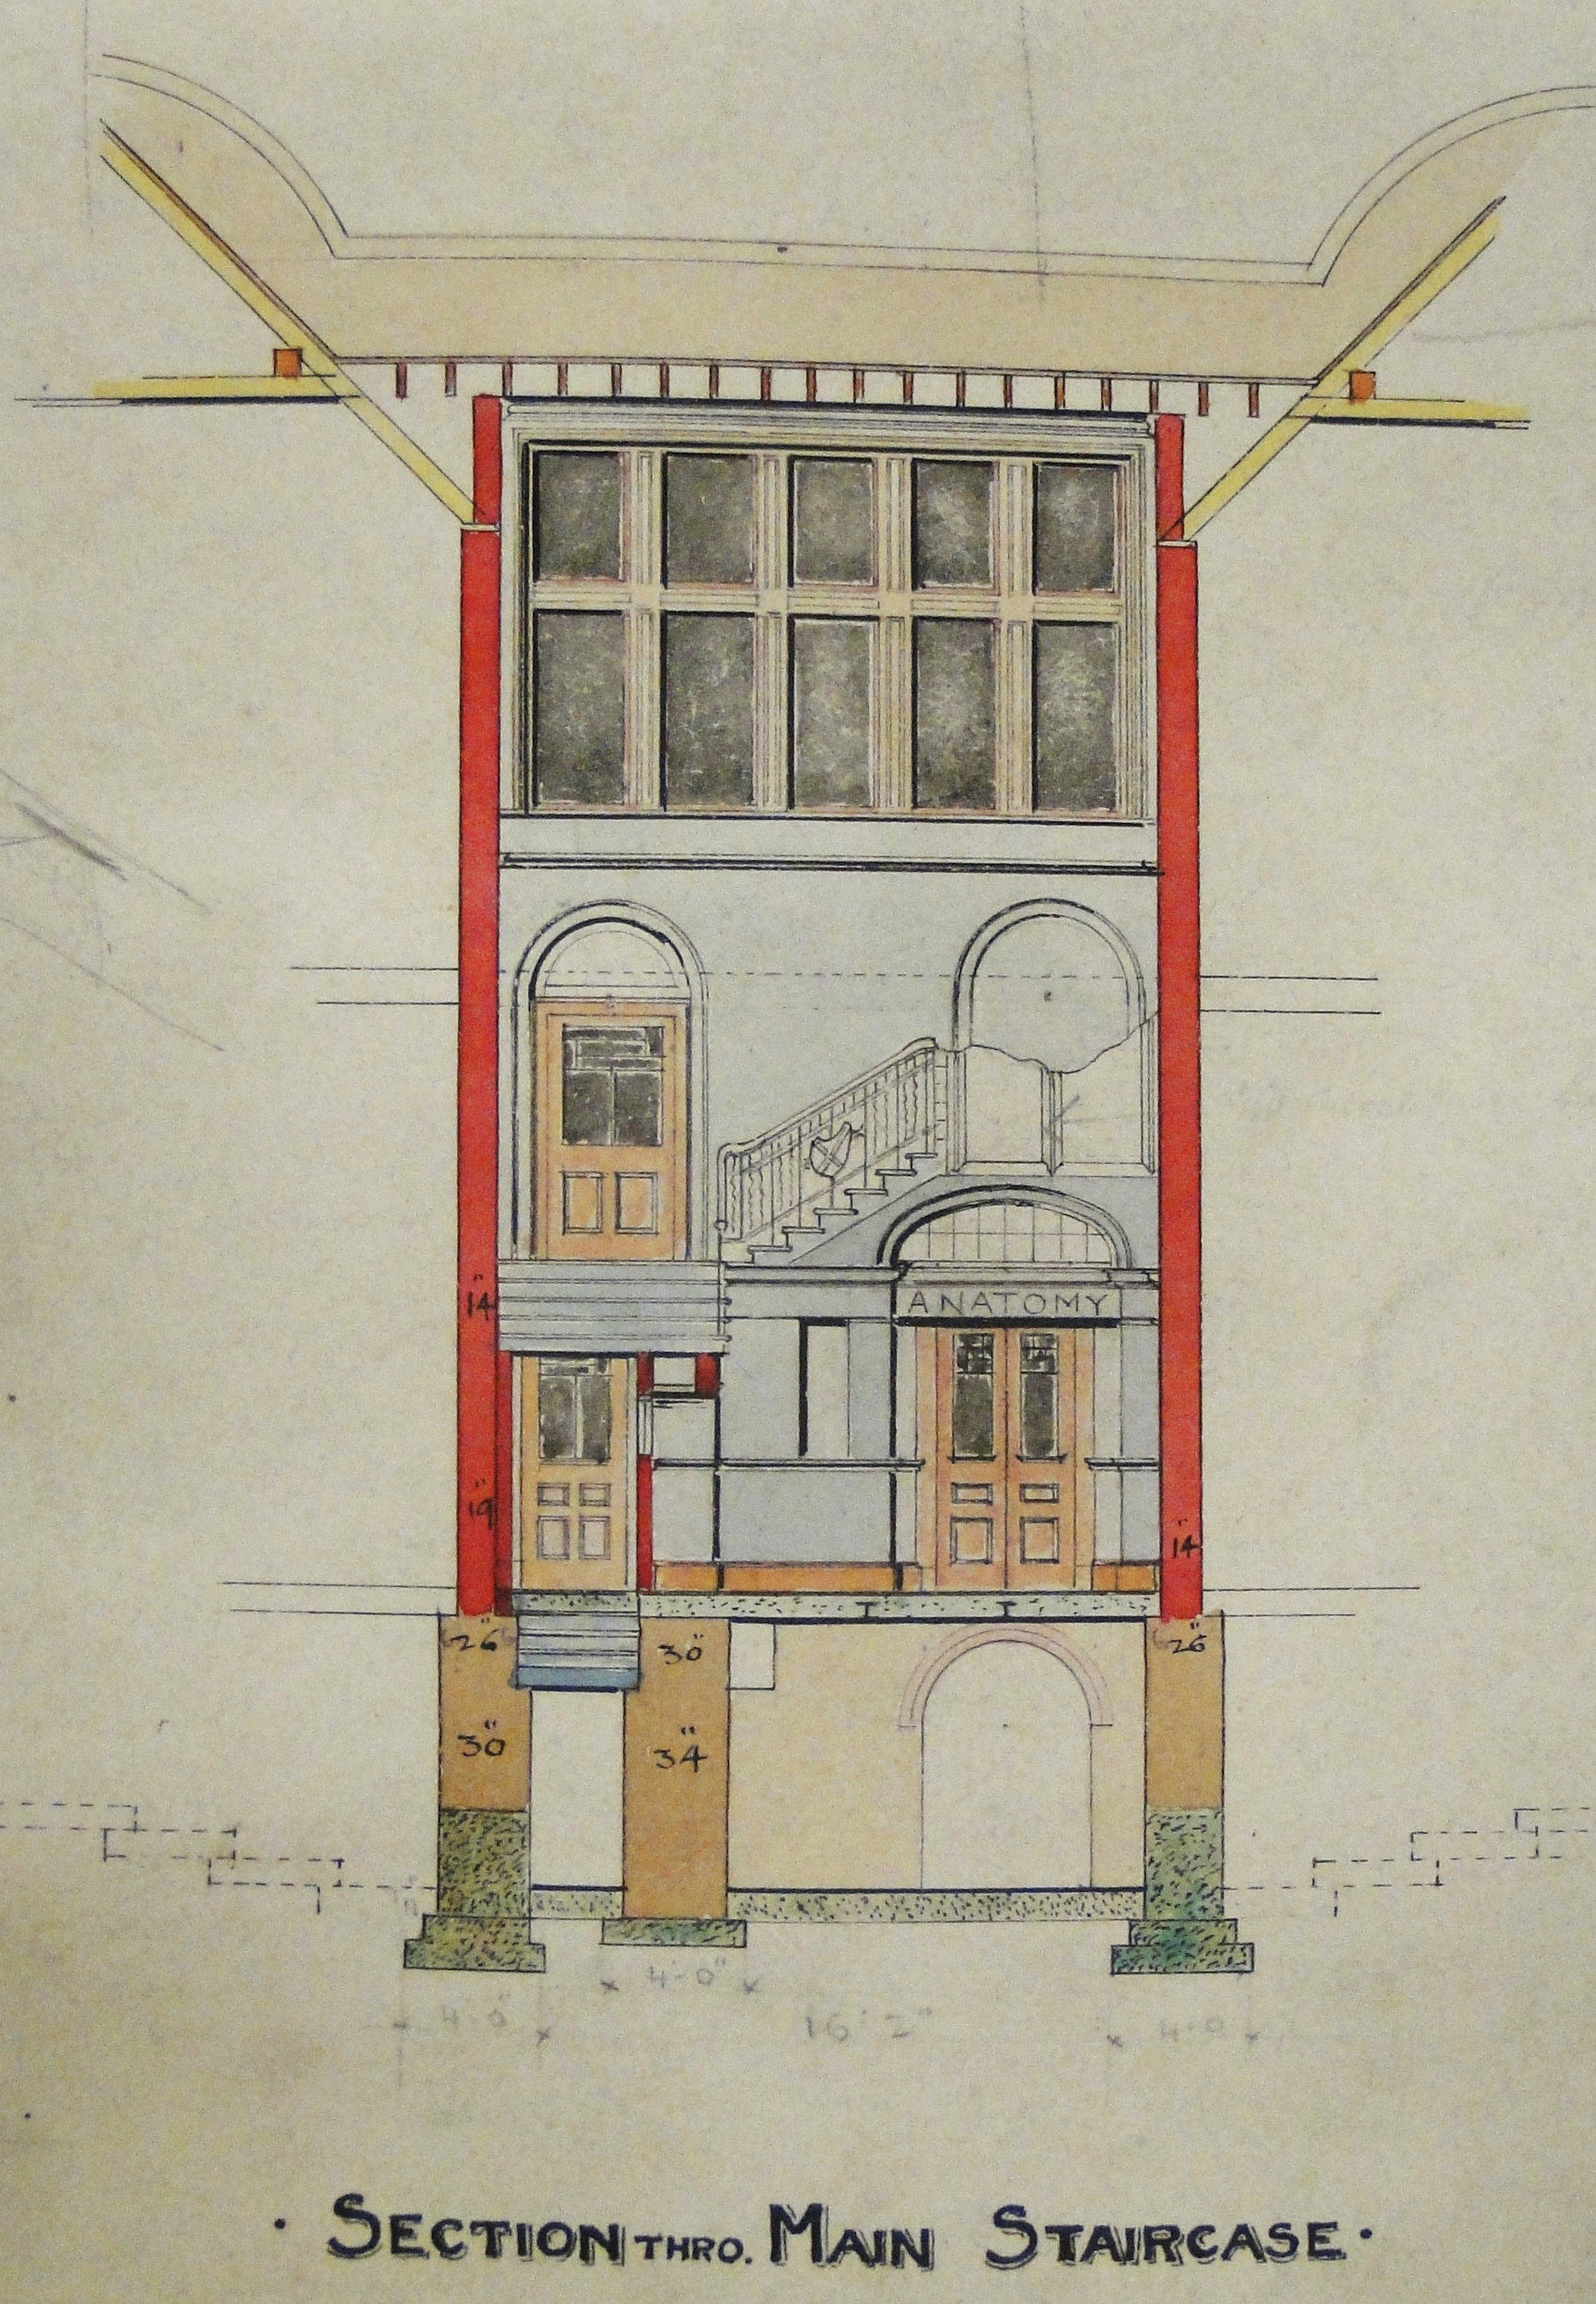 Gillespie and Scott's alterations to the Bute Medical School, University of St Andrews, 1897-98 (St Andrews ms37778b/34)